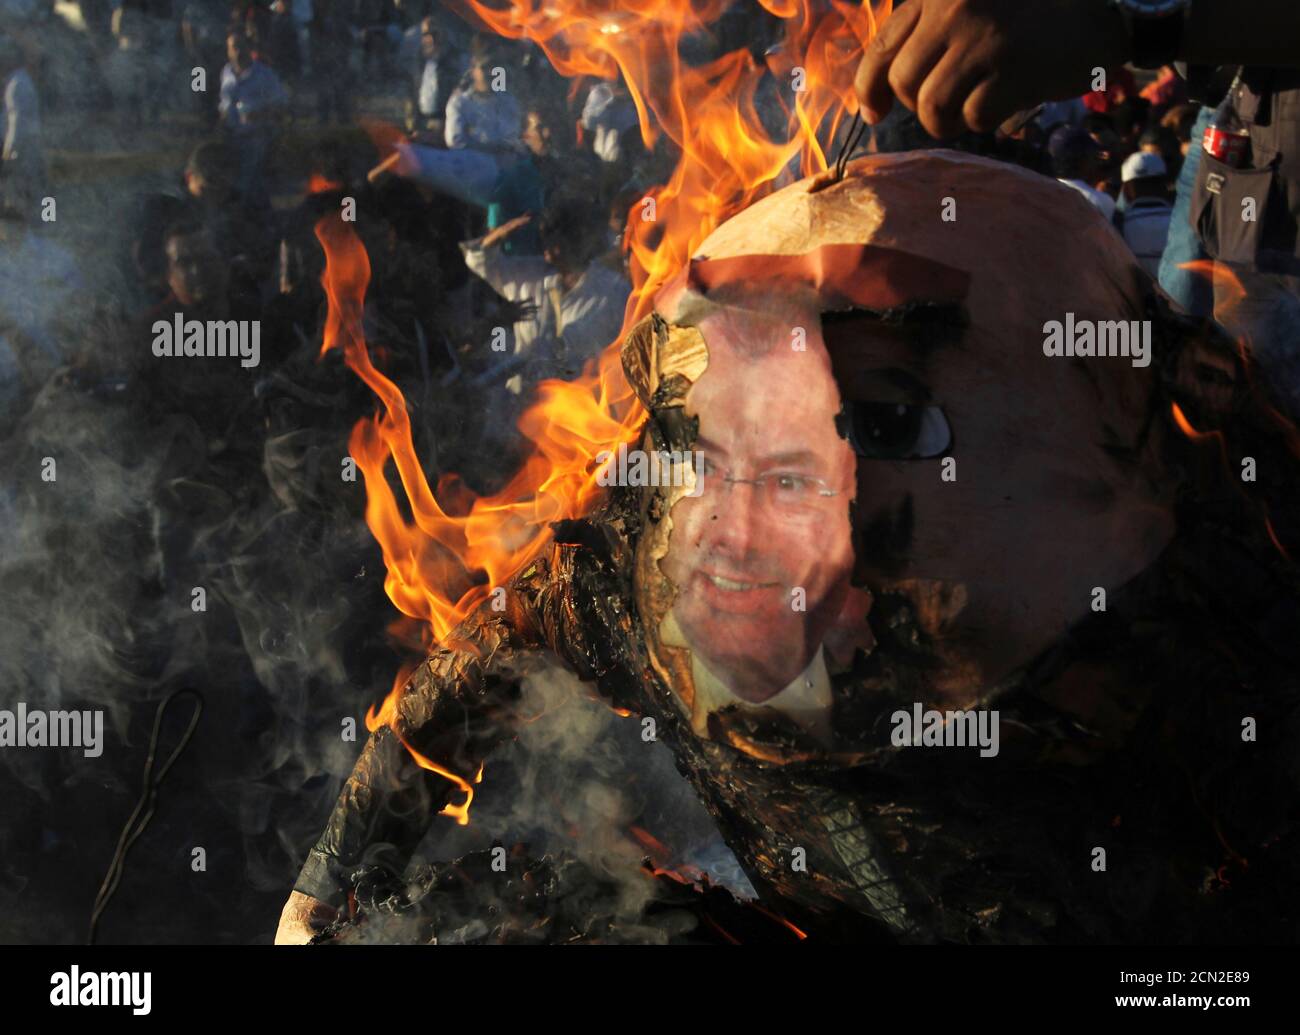 Demonstrators burn an effigy of Mexico's Finance Minister Luis Videgaray during a protest against the federal government's economic and tax reforms in Ciudad Juarez October 22, 2013. The Lower House maintained the government's plan to raise the lower 11 percent value-added tax (VAT) rate for border states to match the national rate of 16 percent.  REUTERS/Jose Luis Gonzalez (MEXICO - Tags: CIVIL UNREST POLITICS BUSINESS SOCIETY) Stock Photo